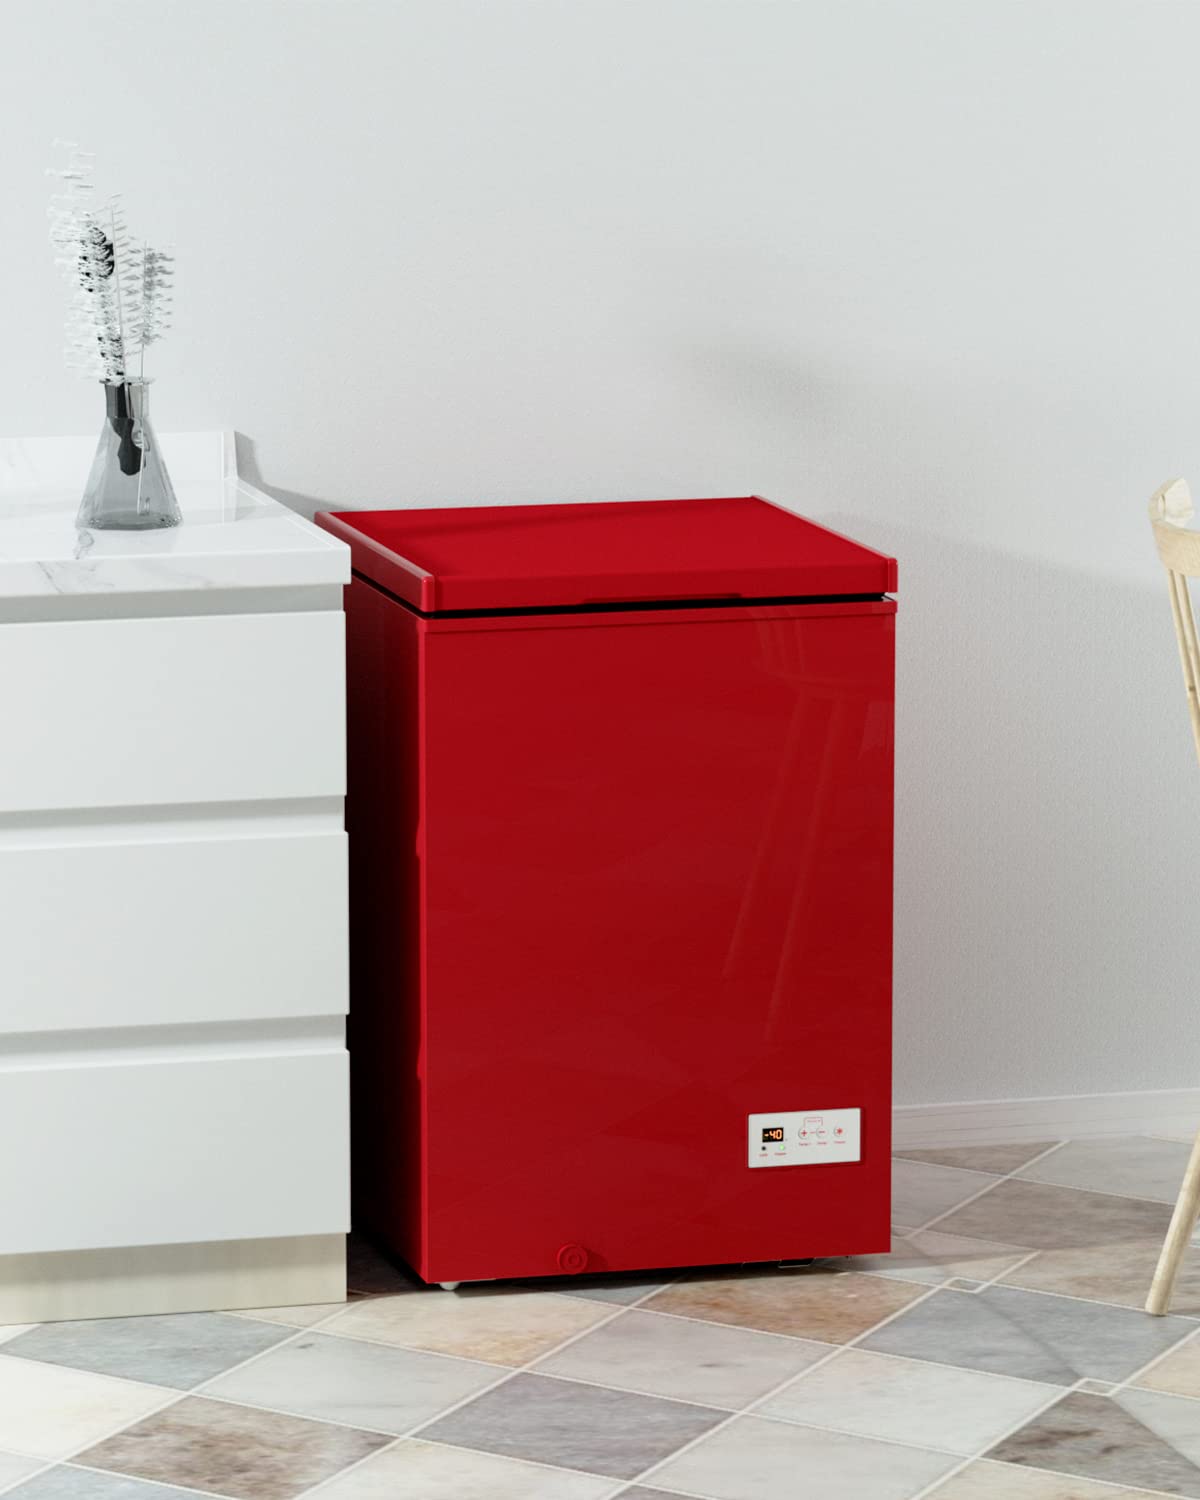 Watoor 3.5 Cu Ft Chest Freezer - Super-Low Temperature - 2 Removable Baskets - Electronic Control 14℉ to -40℉- Red